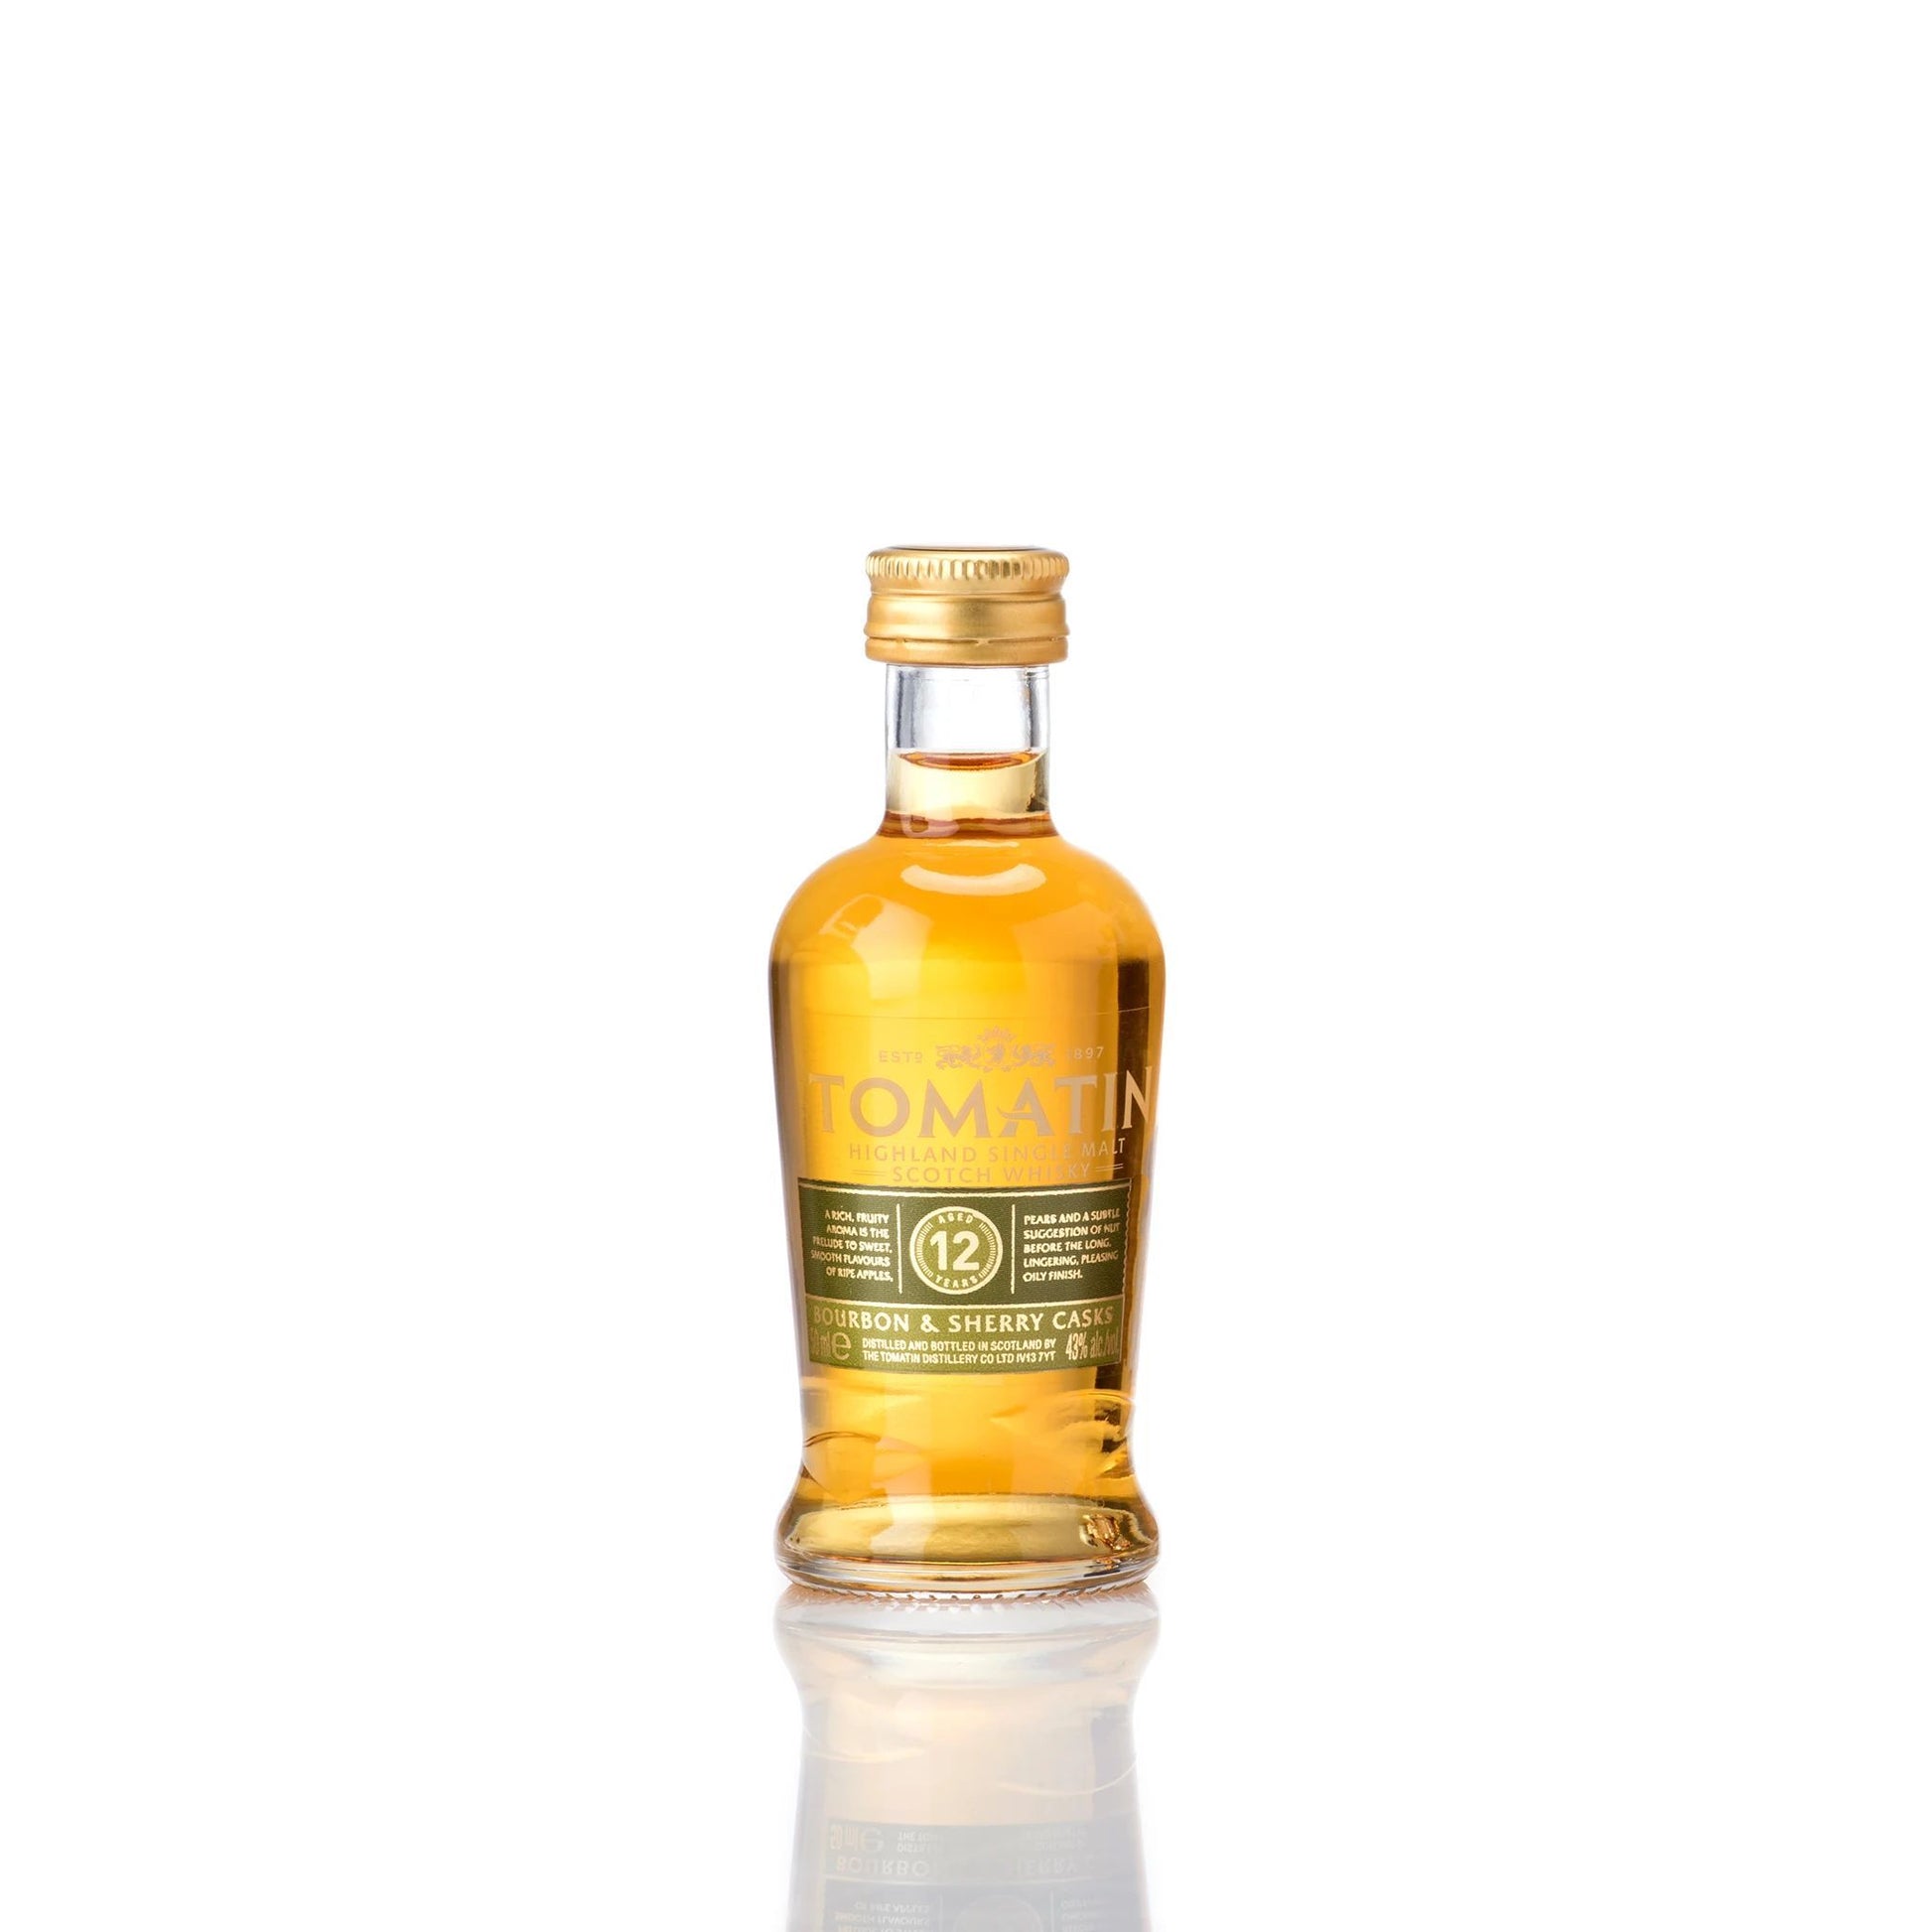 5cl Tomatin 12 Year Old-Miniatures-Fountainhall Wines